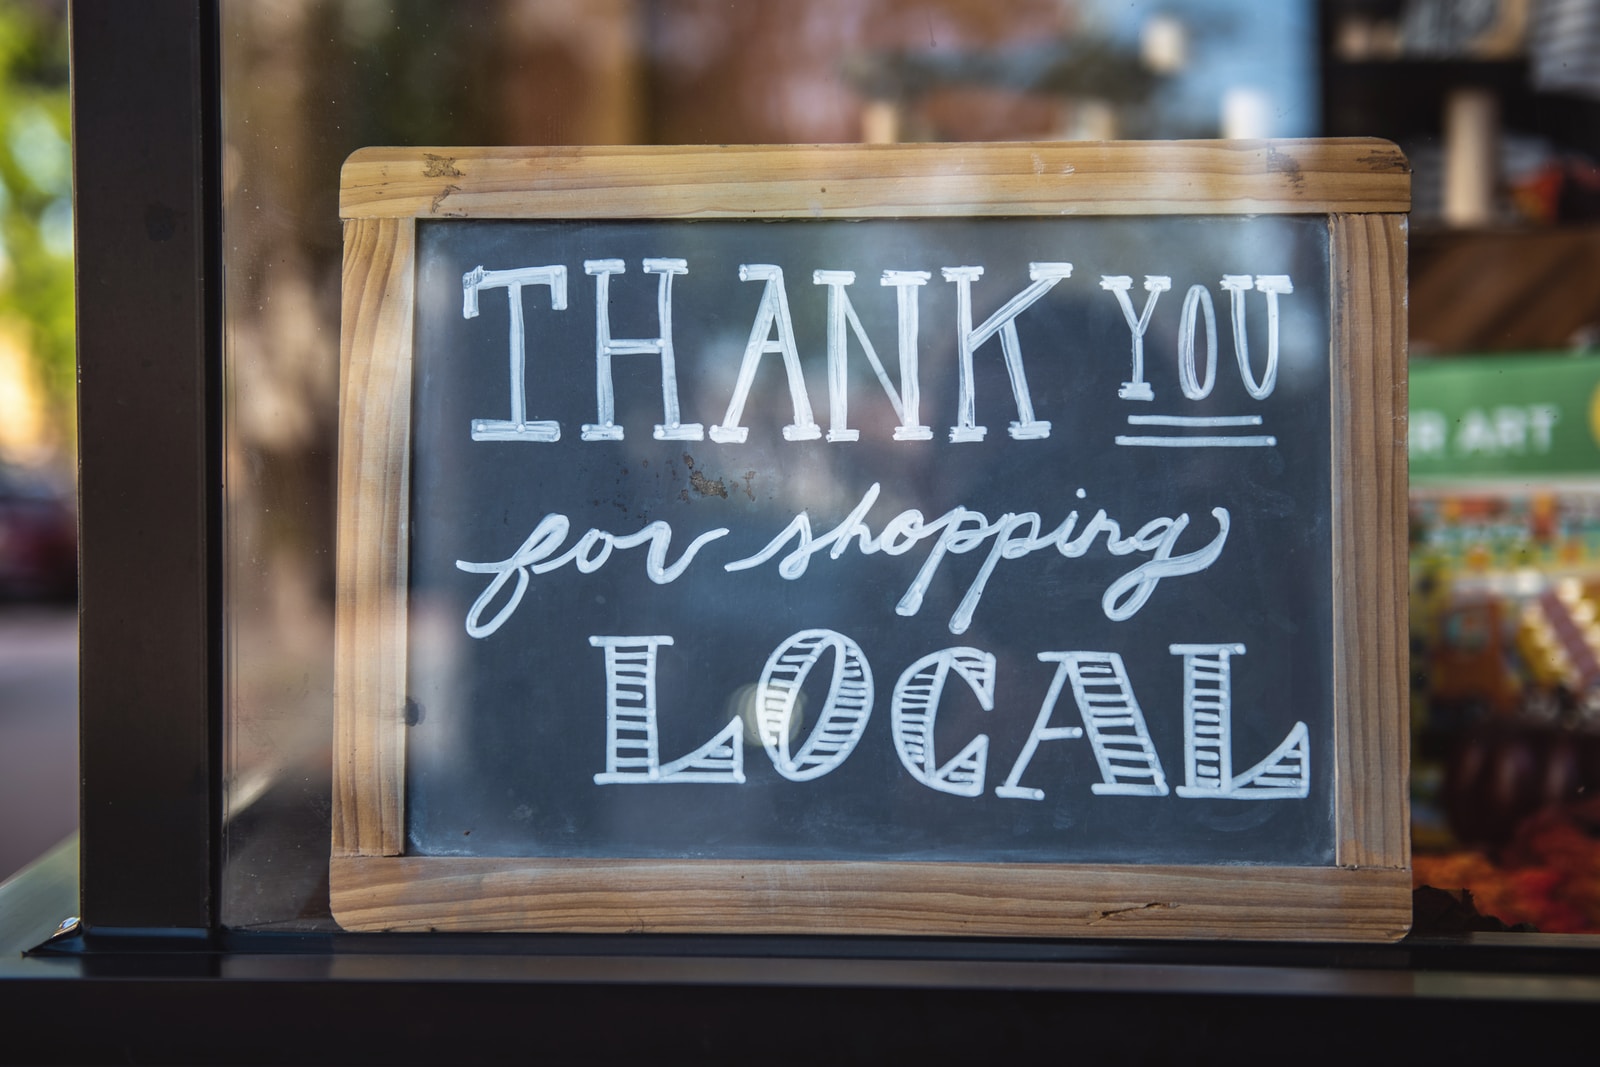 thank you for shopping local sign in window